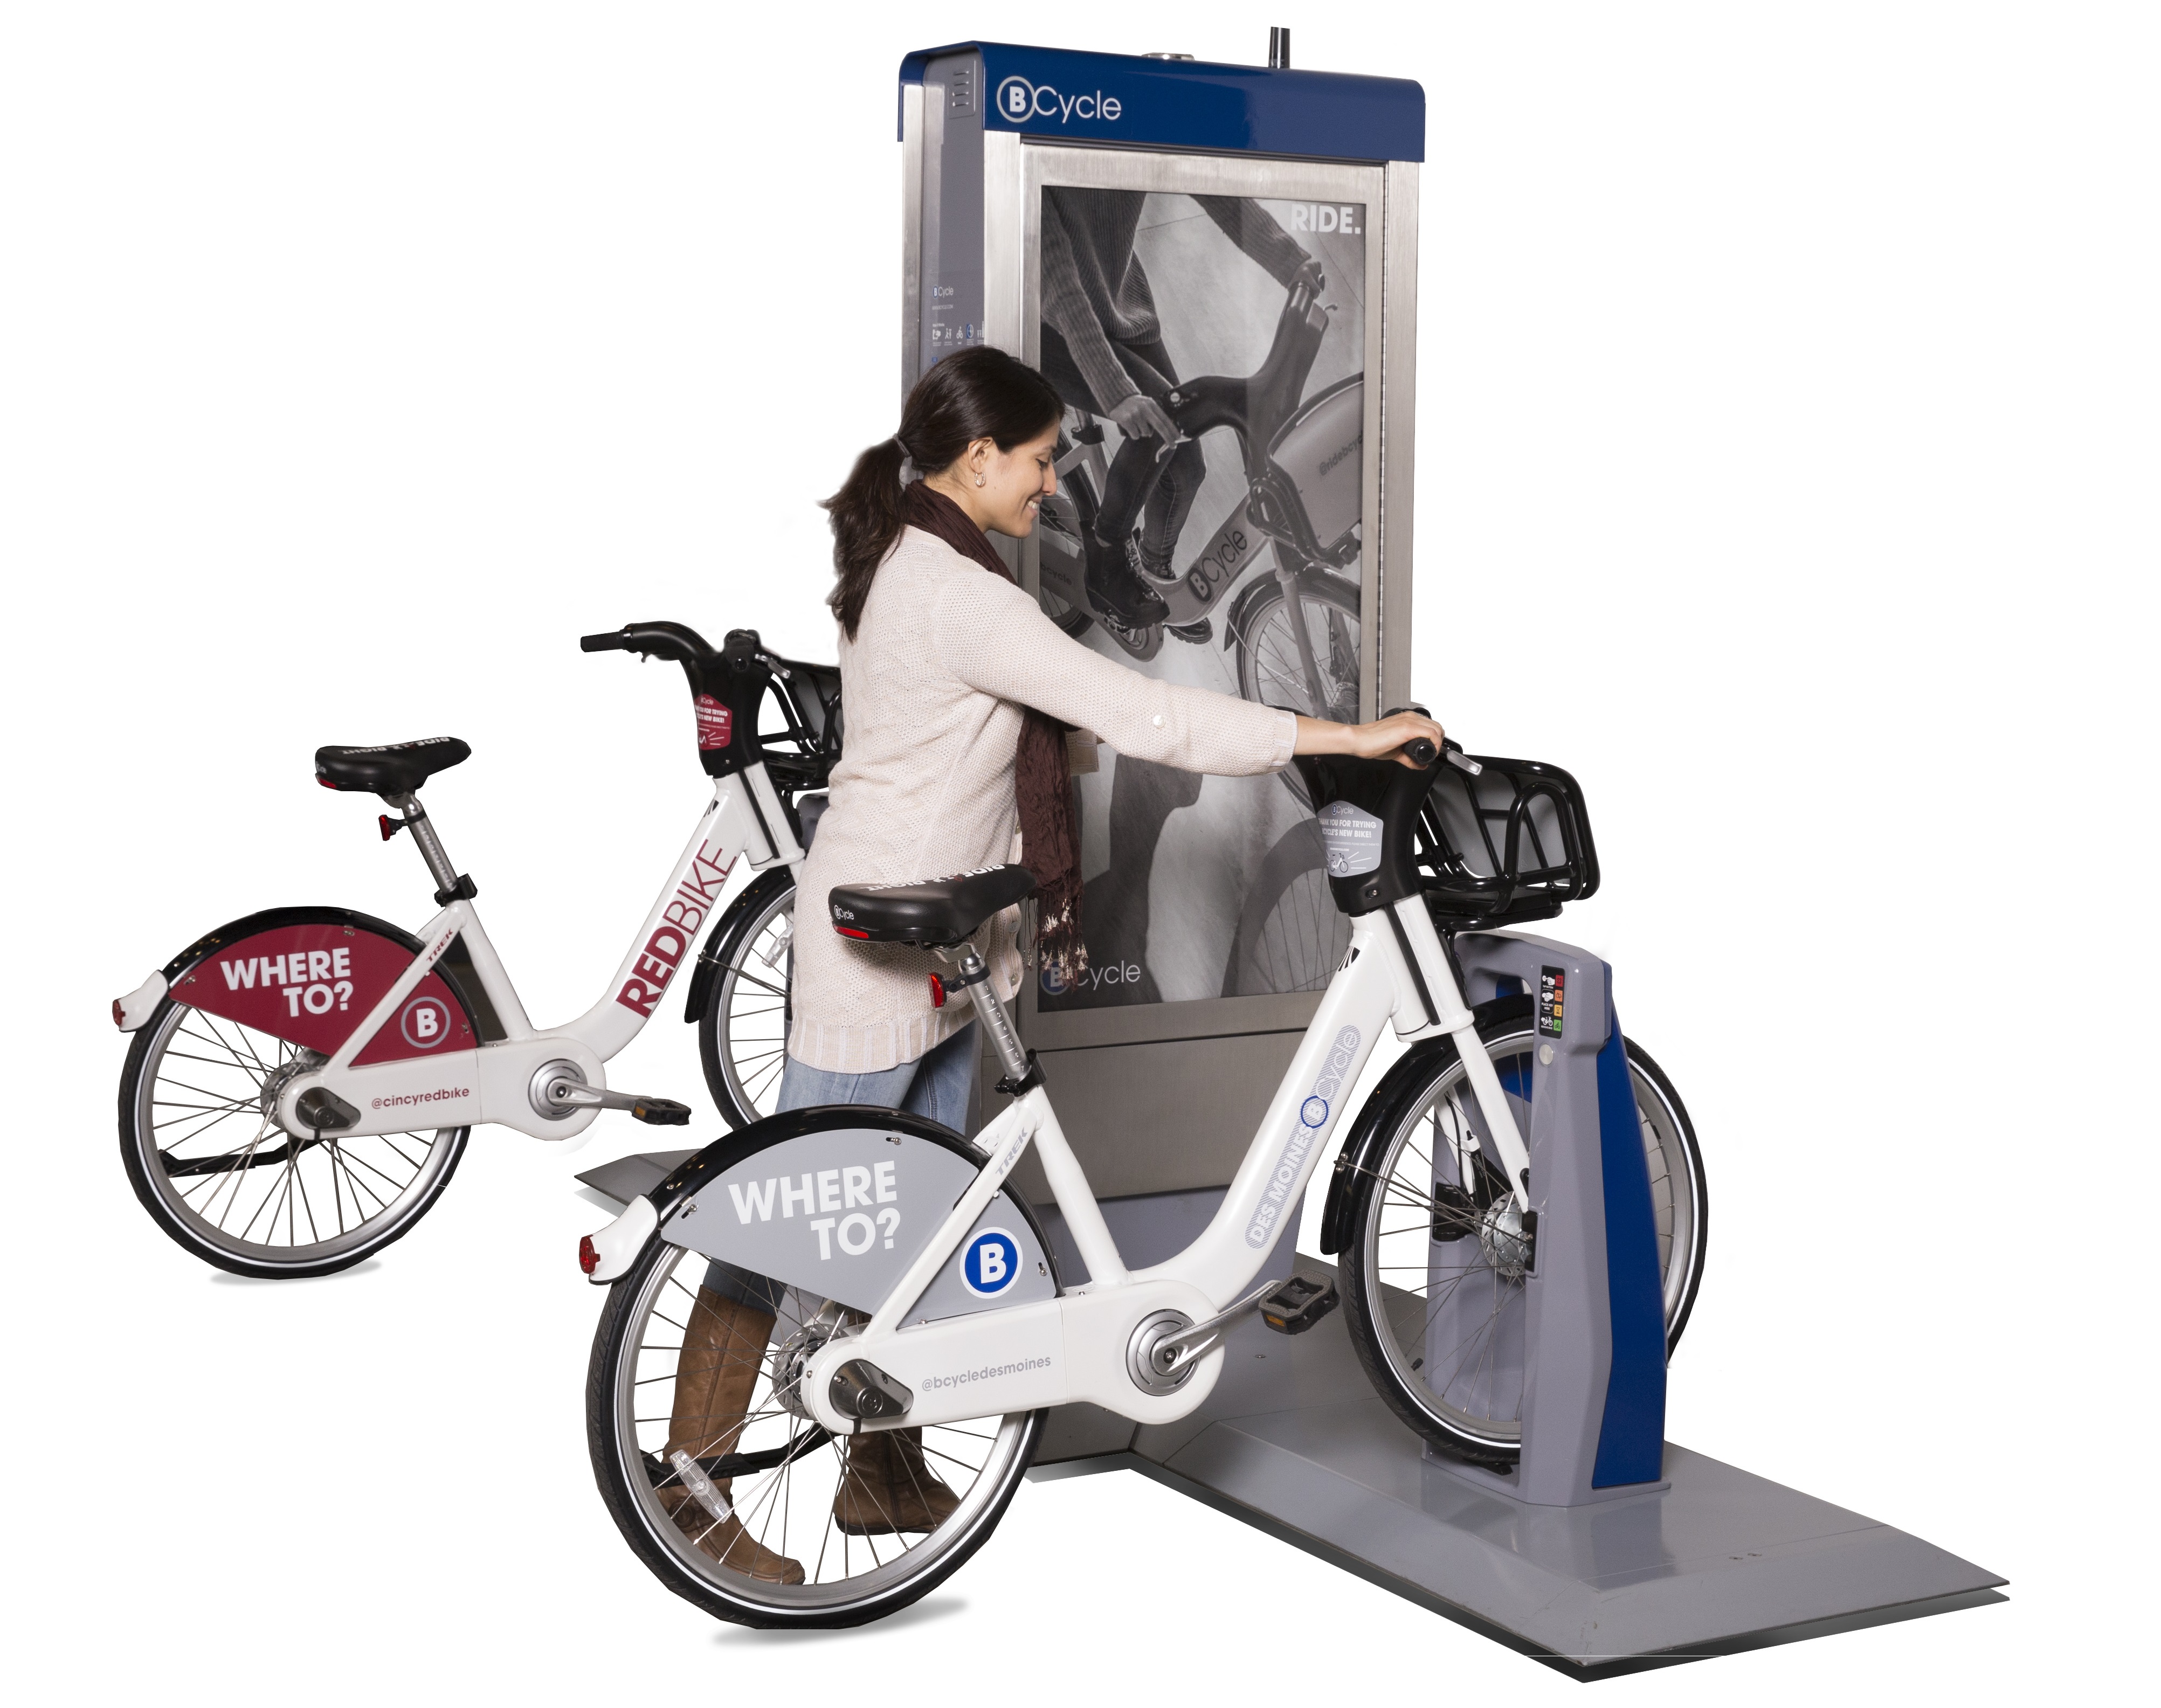 b cycle stations near me